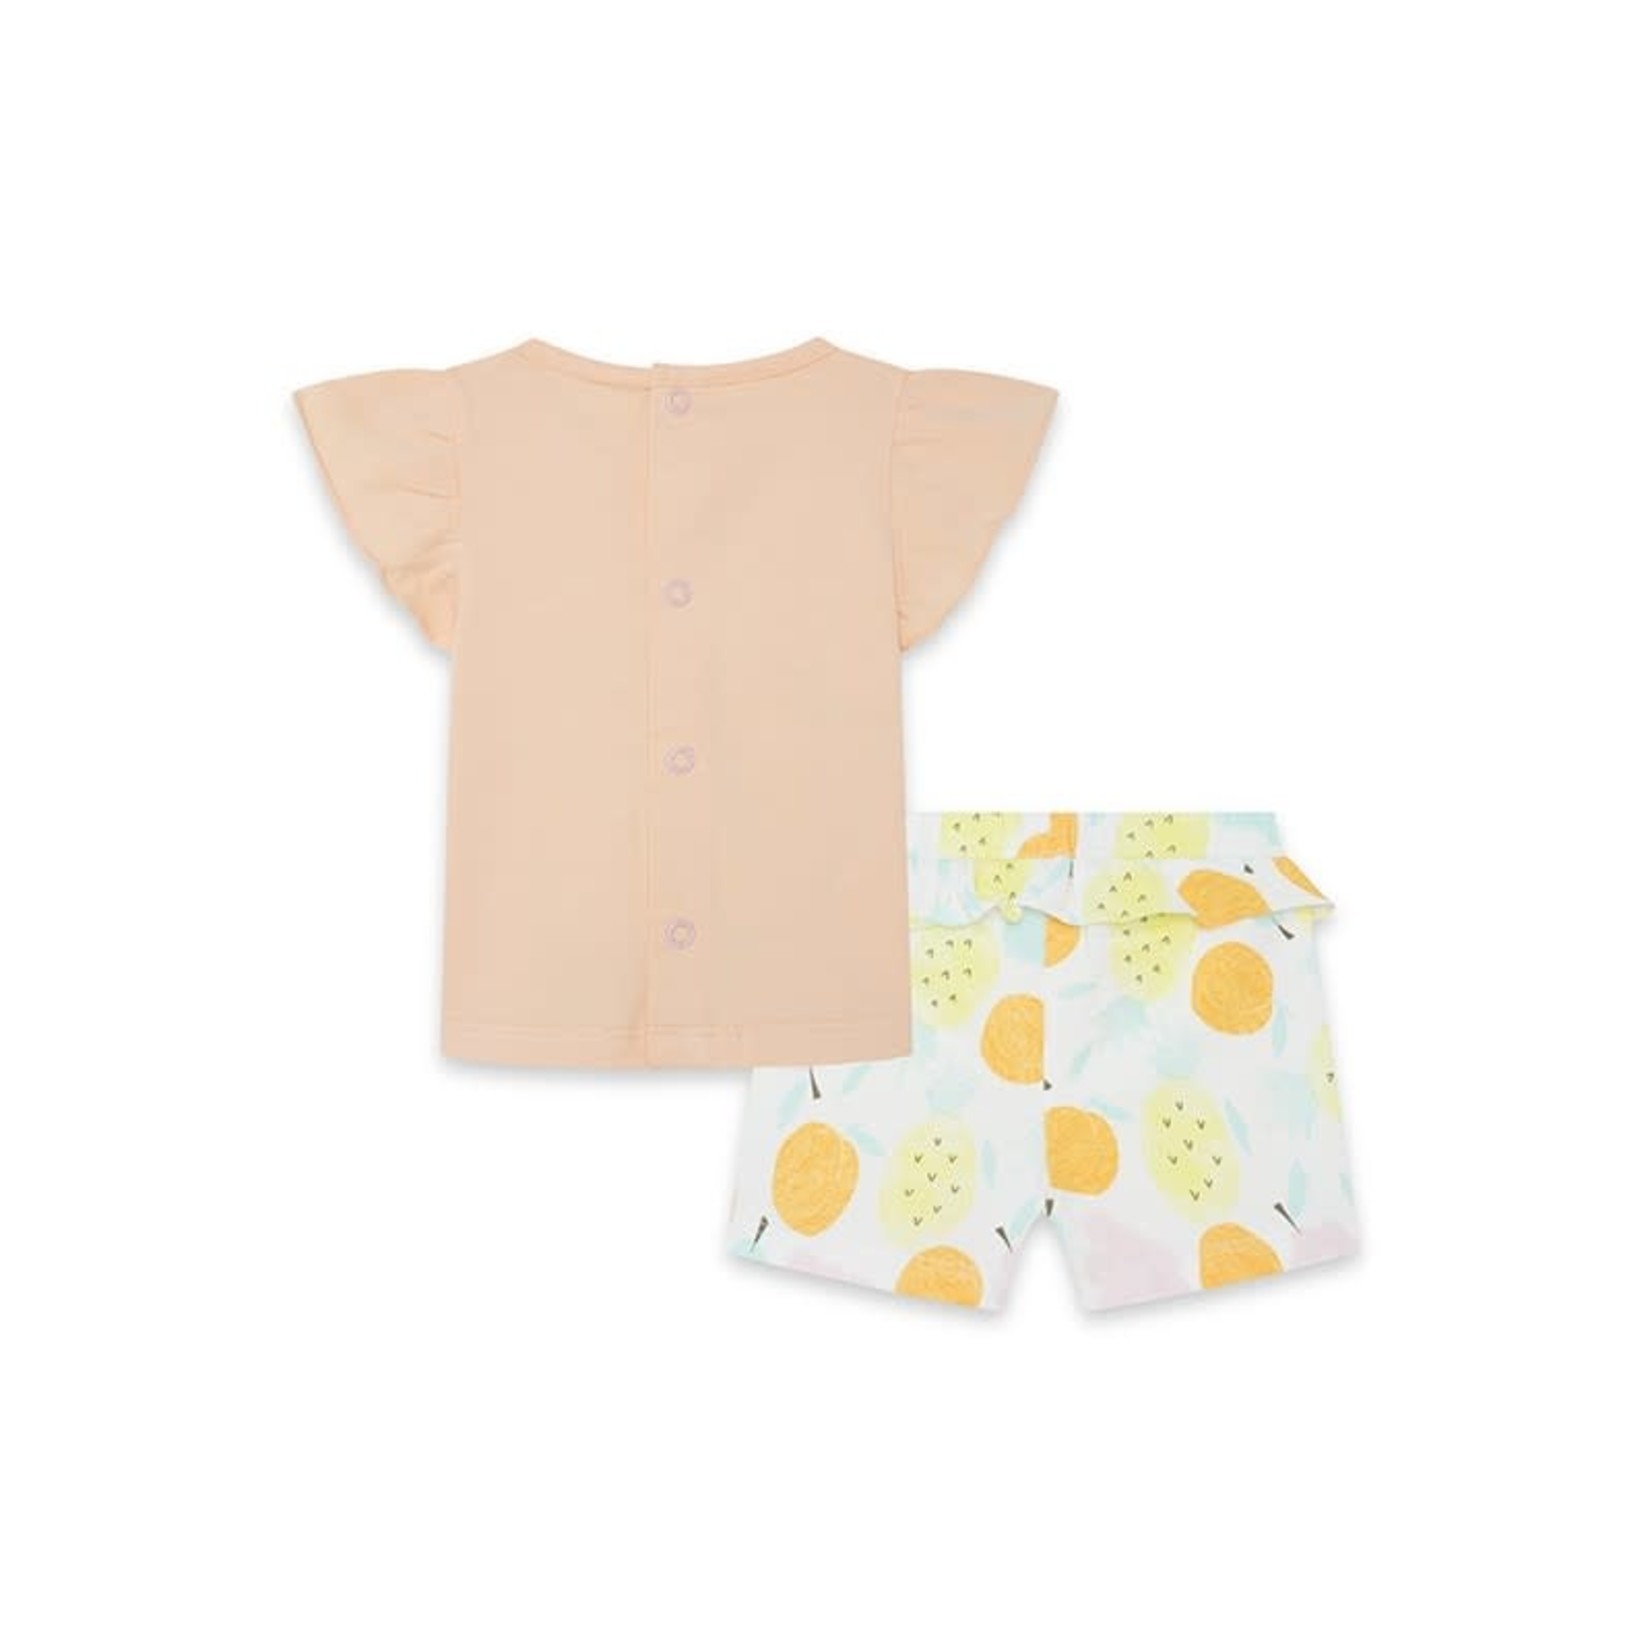 TucTuc TUC TUC - Two-piece kit, peach shortsleeve t-shirt and jersey shorts with fruit print 'Picnic Time'